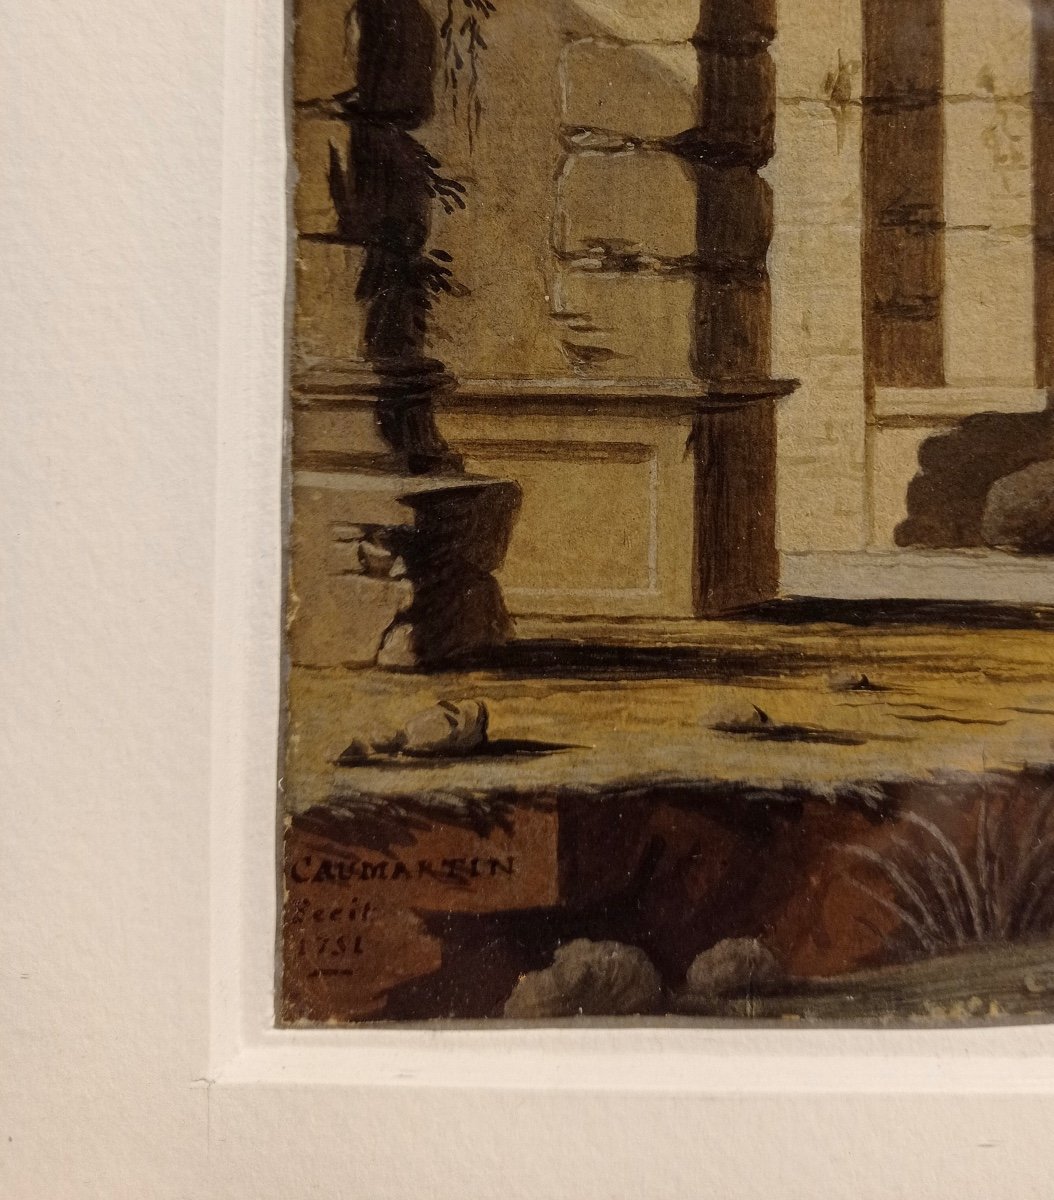 Caumartin, Watercolor And Gouache On Paper, Signed And Dated 1751-photo-3